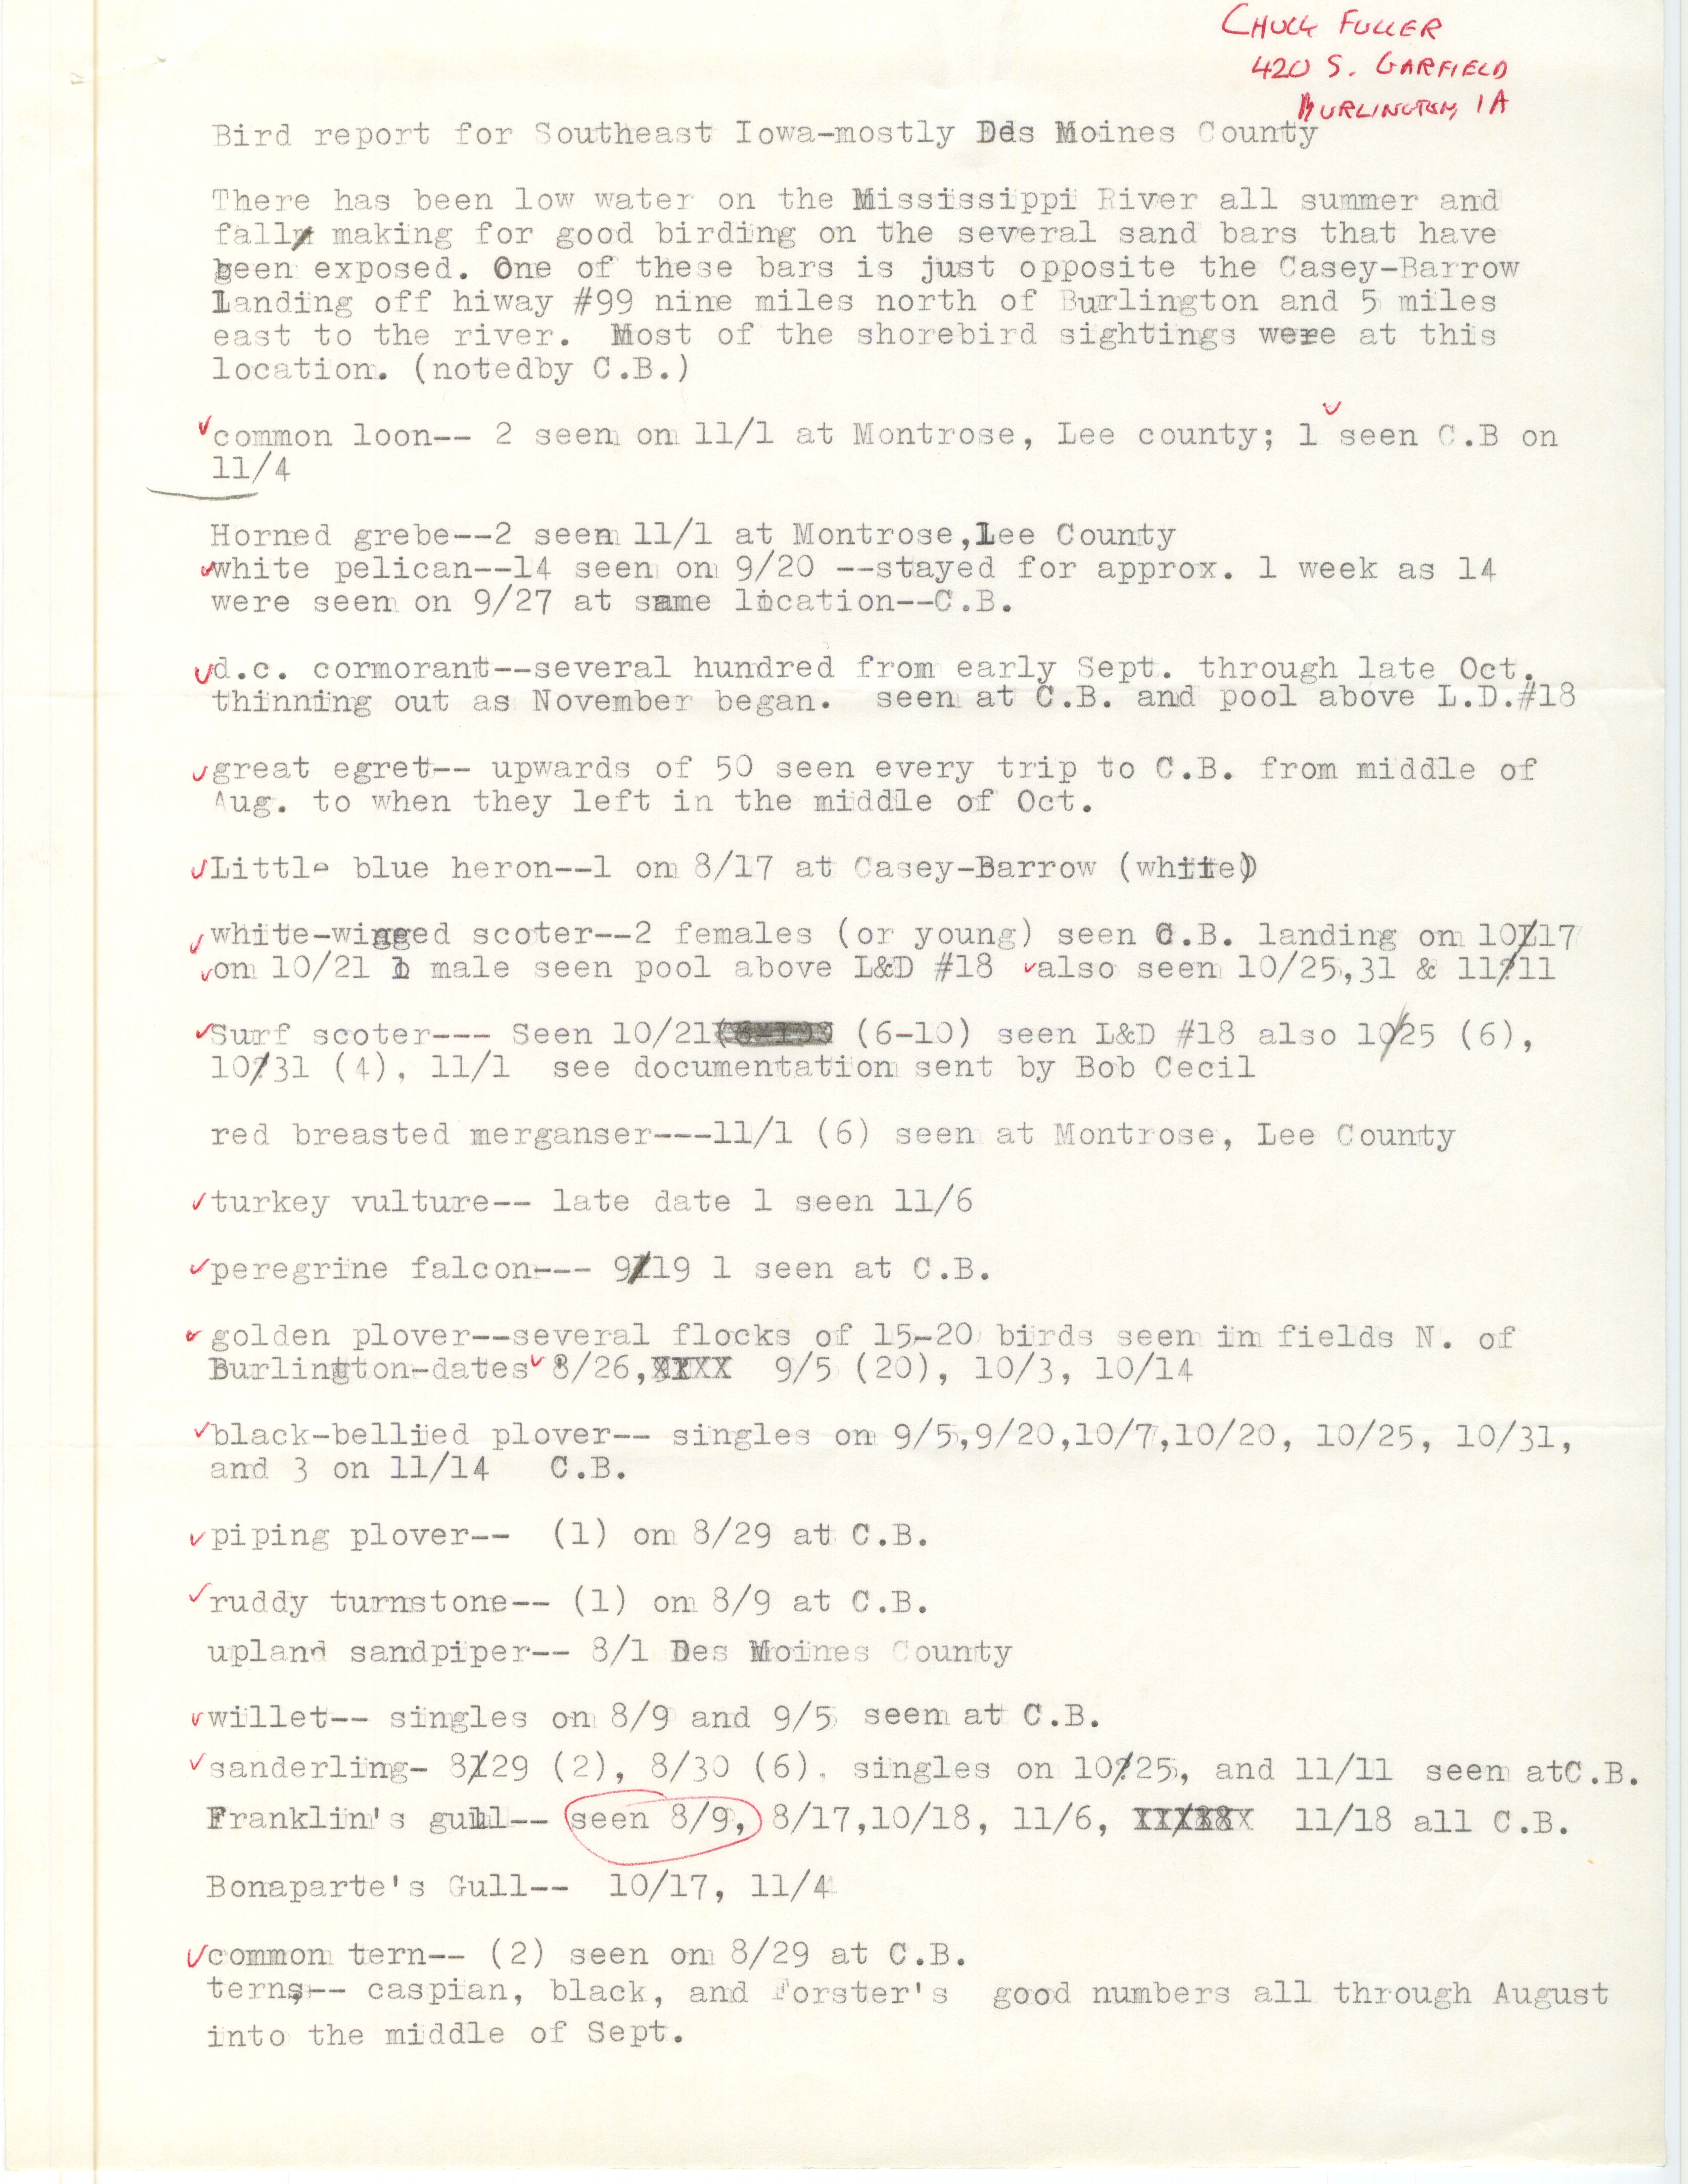 Field notes contributed by Charles Fuller, fall 1987